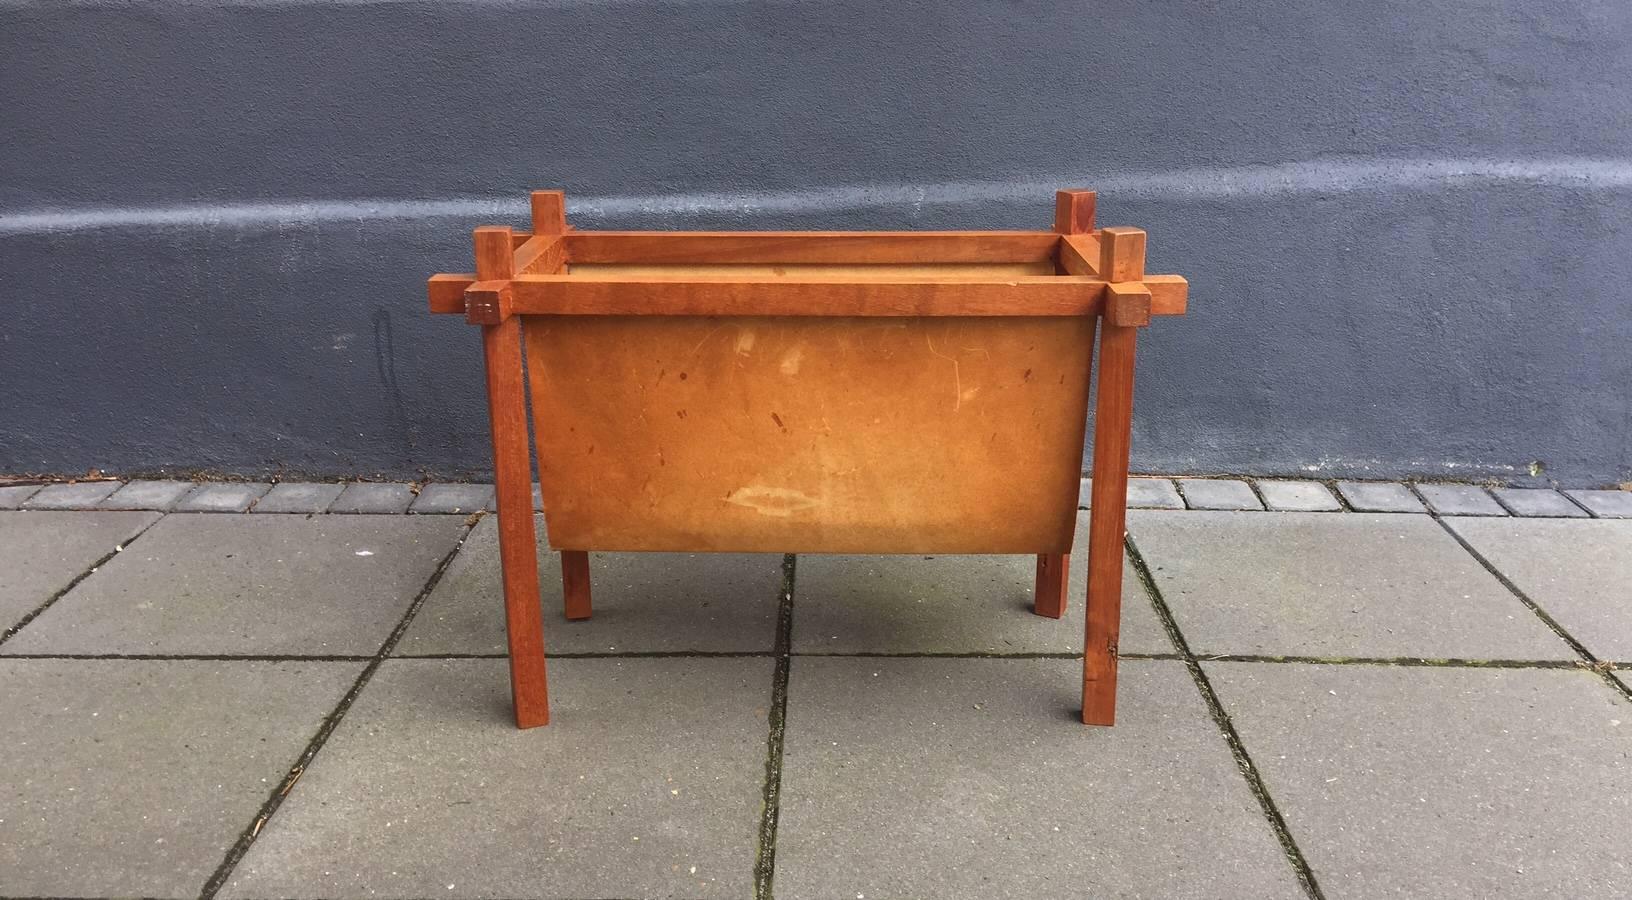 Magazine rack in teak and patinated leather made by Skjode Skjern, Denmark in the 1950s. The design is simplistic, yet the construction shows distinct wooden joints. A thick leather cradle hangs in the wooden frame and provides plenty of storage